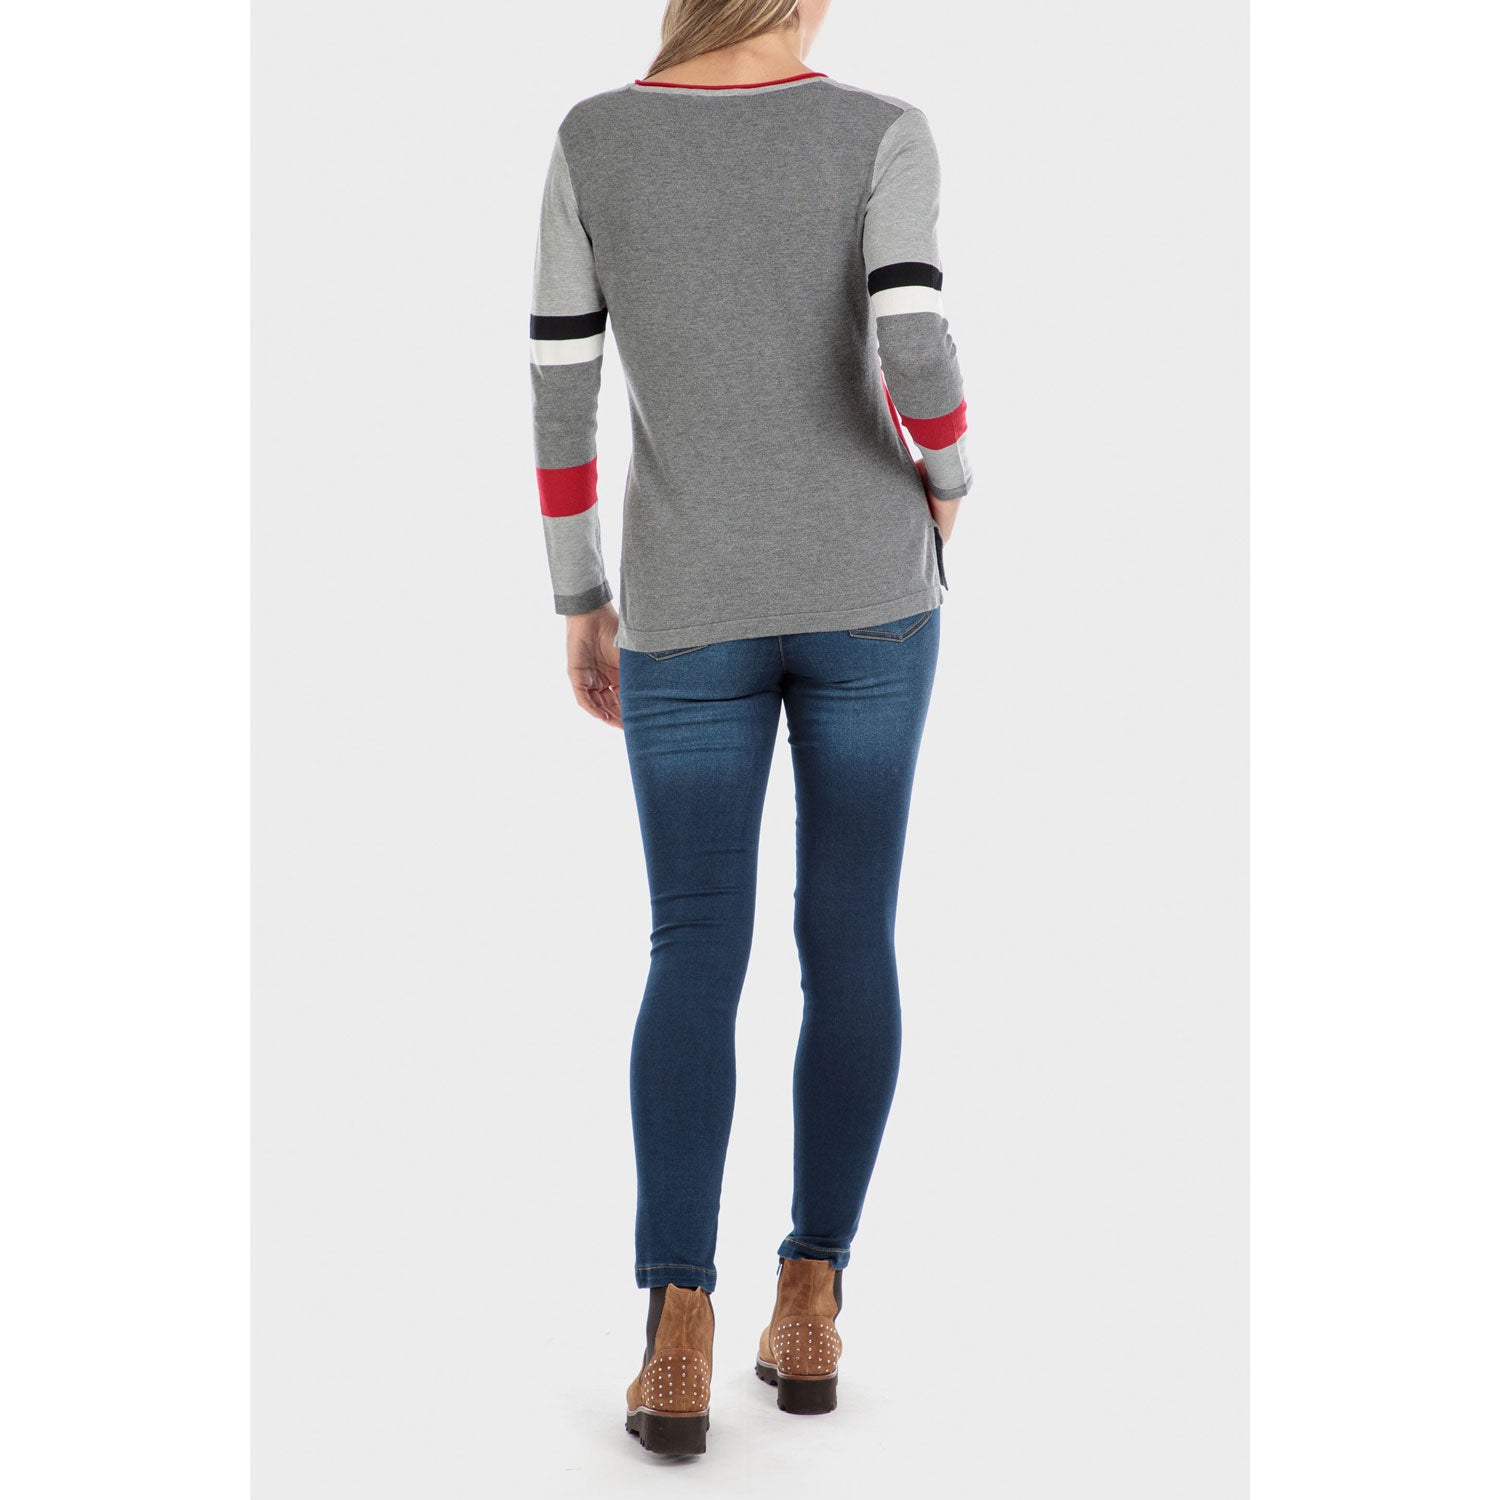 Punt Roma Intarsia Sweater - Grey/Red 4 Shaws Department Stores